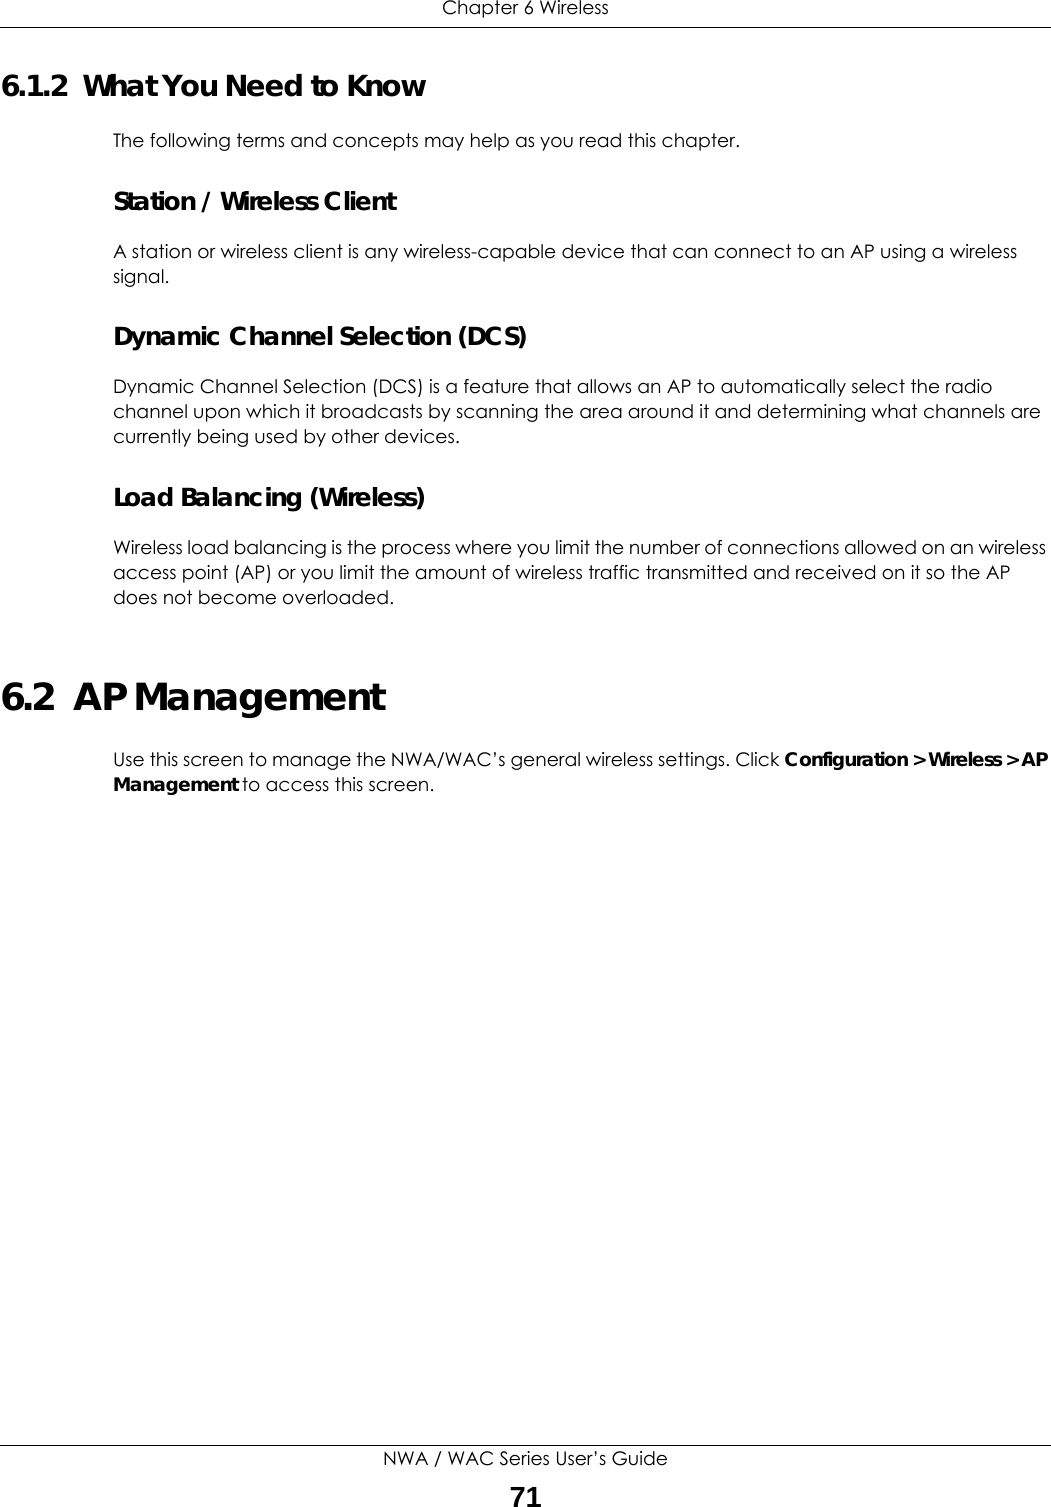 Chapter 6 WirelessNWA / WAC Series User’s Guide716.1.2  What You Need to KnowThe following terms and concepts may help as you read this chapter.Station / Wireless ClientA station or wireless client is any wireless-capable device that can connect to an AP using a wireless signal.Dynamic Channel Selection (DCS)Dynamic Channel Selection (DCS) is a feature that allows an AP to automatically select the radio channel upon which it broadcasts by scanning the area around it and determining what channels are currently being used by other devices.Load Balancing (Wireless)Wireless load balancing is the process where you limit the number of connections allowed on an wireless access point (AP) or you limit the amount of wireless traffic transmitted and received on it so the AP does not become overloaded. 6.2  AP ManagementUse this screen to manage the NWA/WAC’s general wireless settings. Click Configuration &gt; Wireless &gt; AP Management to access this screen. 